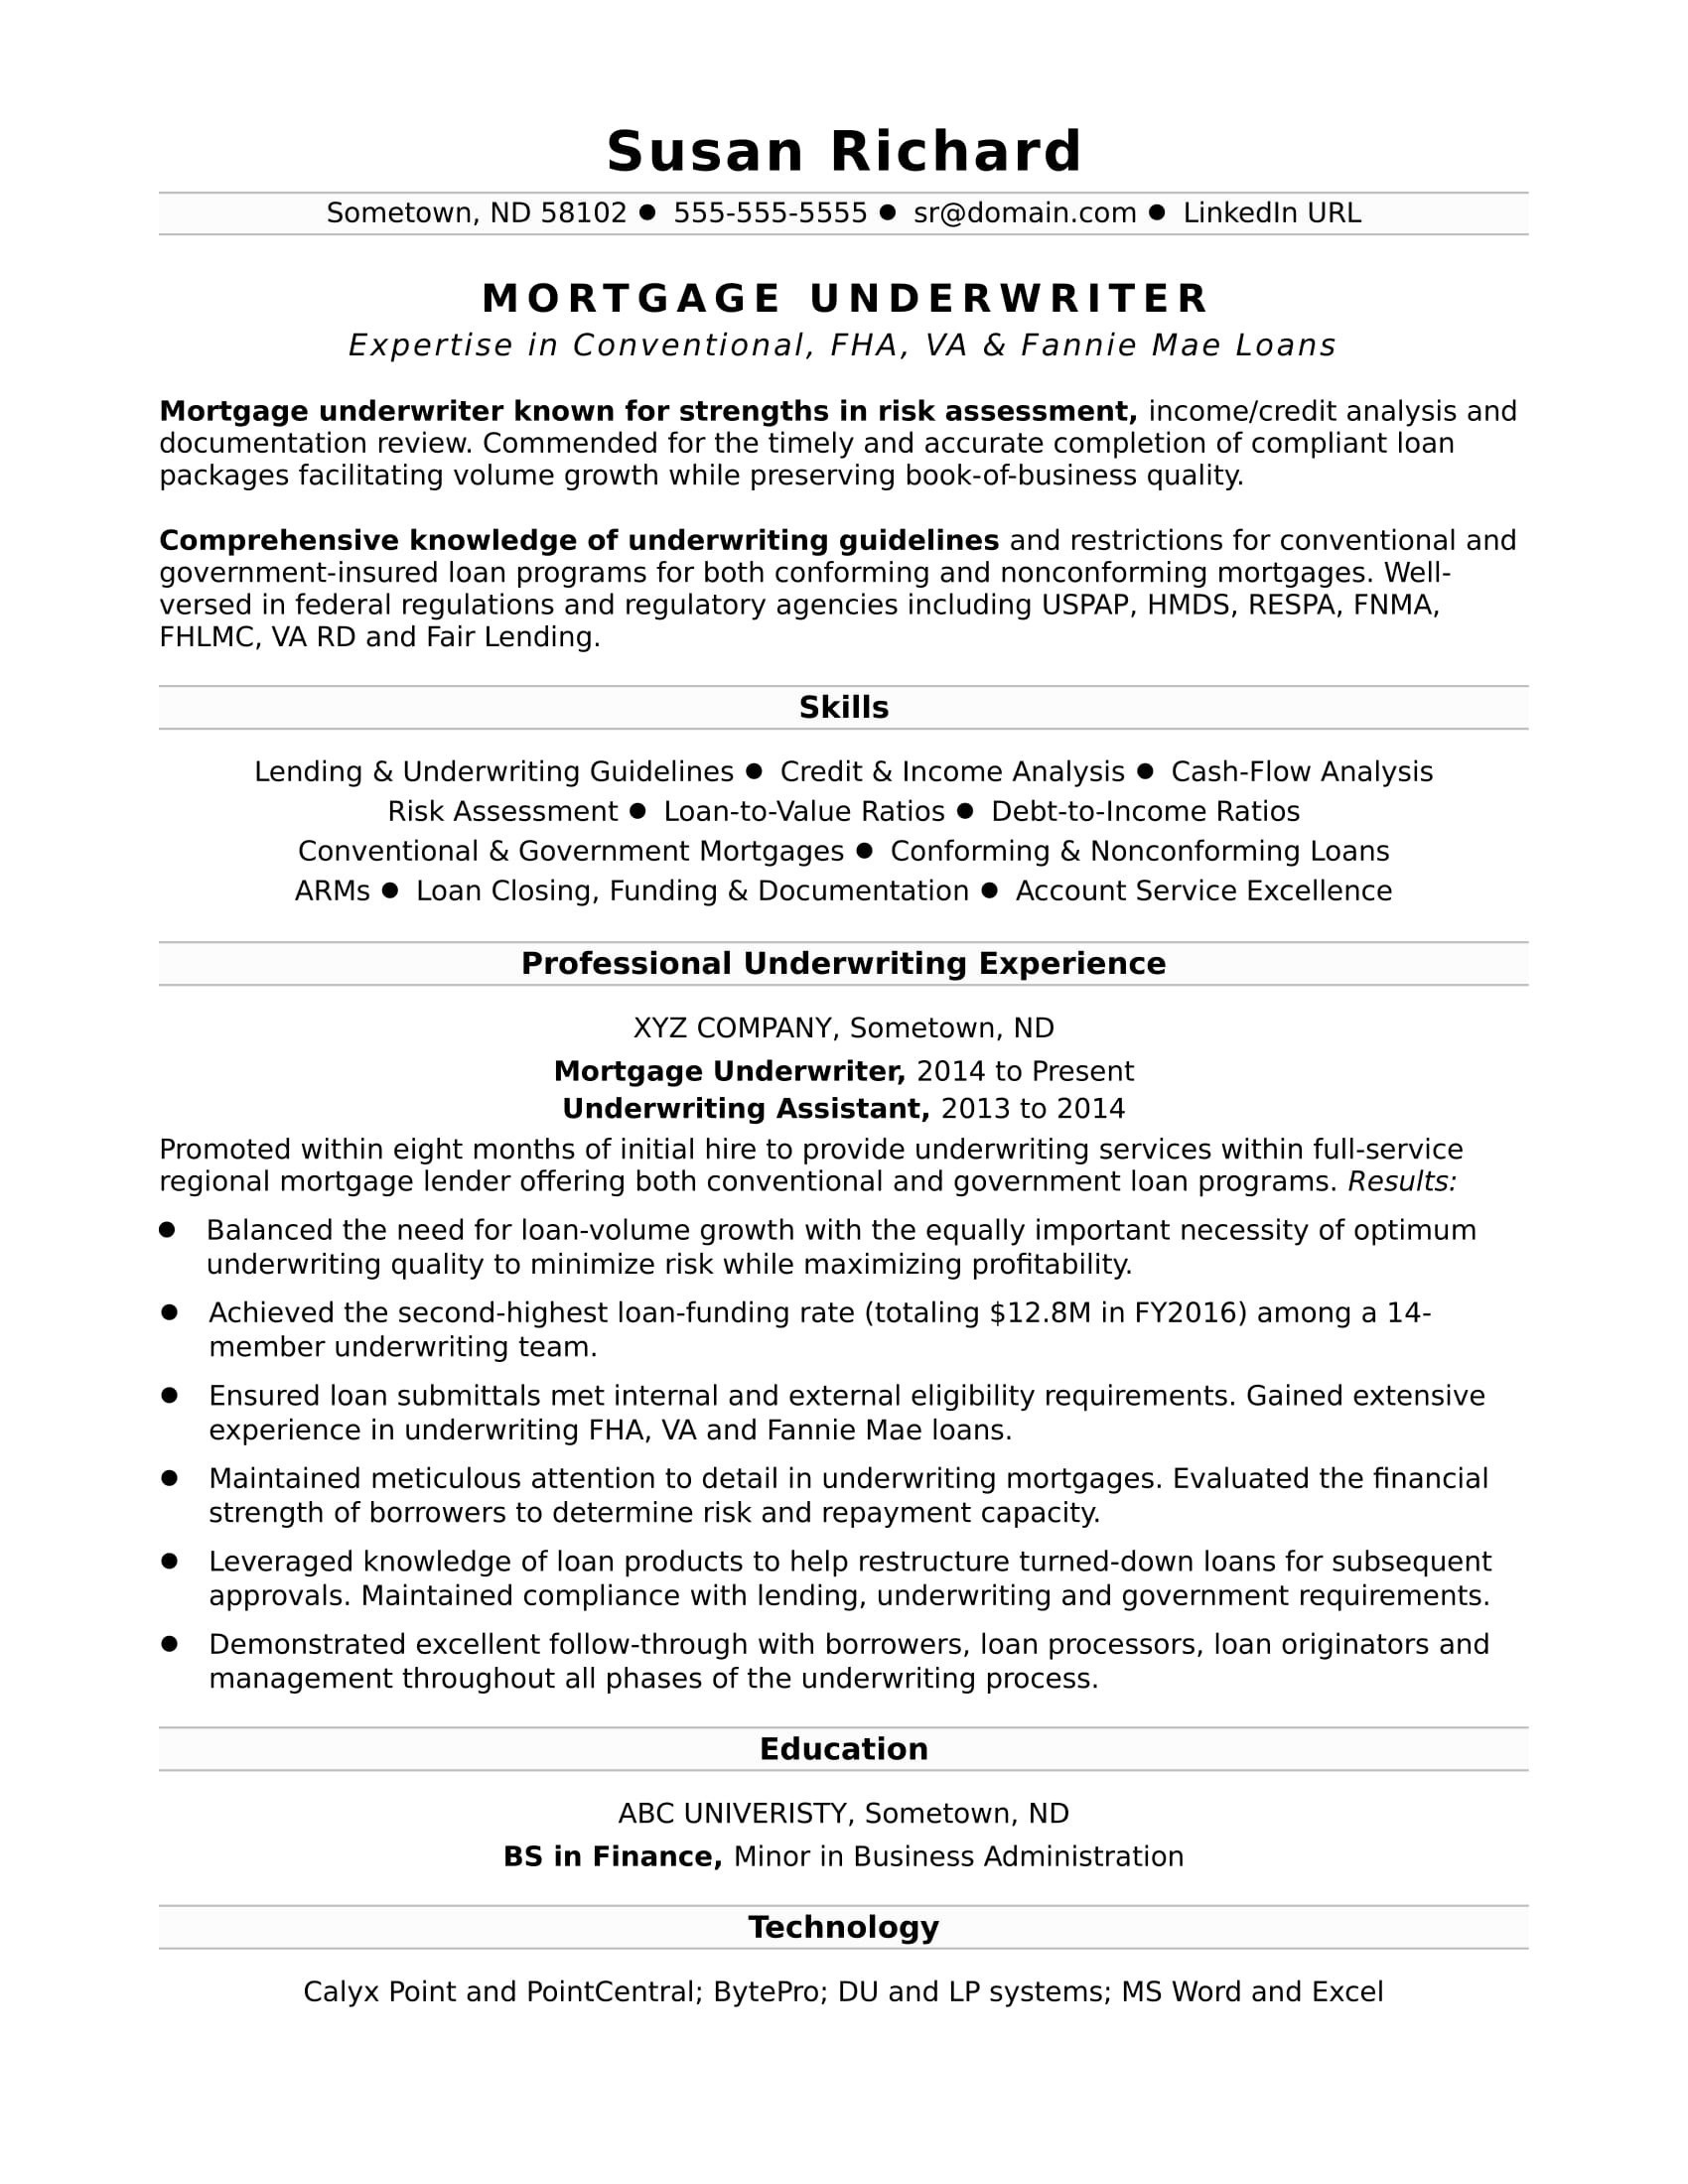 Cover Letter Design Template - Free Resume Search In India Unique New Programmer Resume Lovely